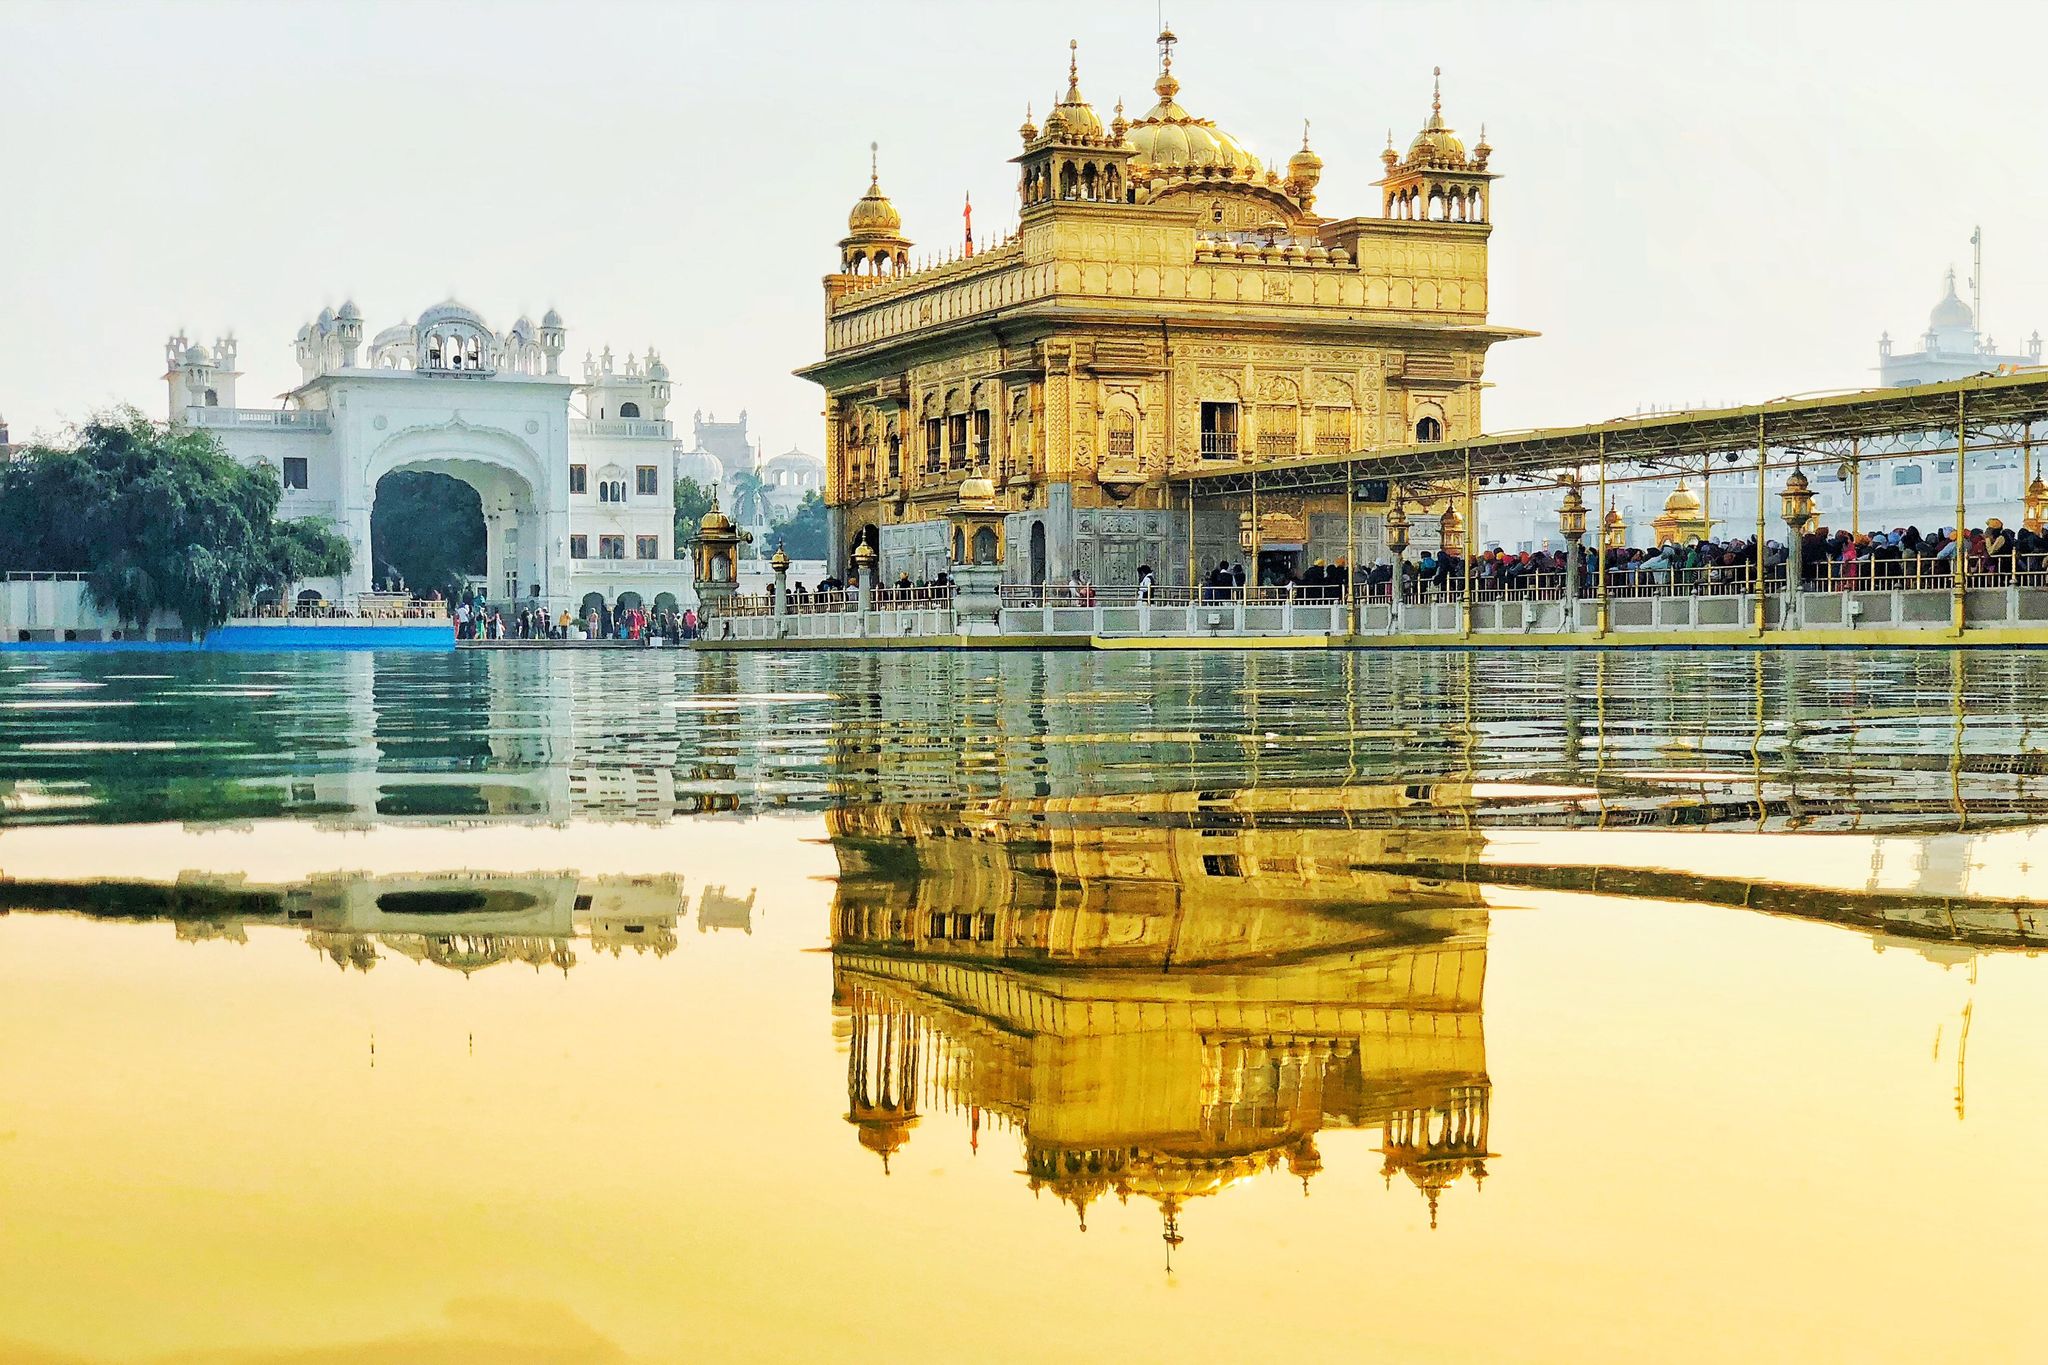 10 Best Hotels in Amritsar near the Golden Temple